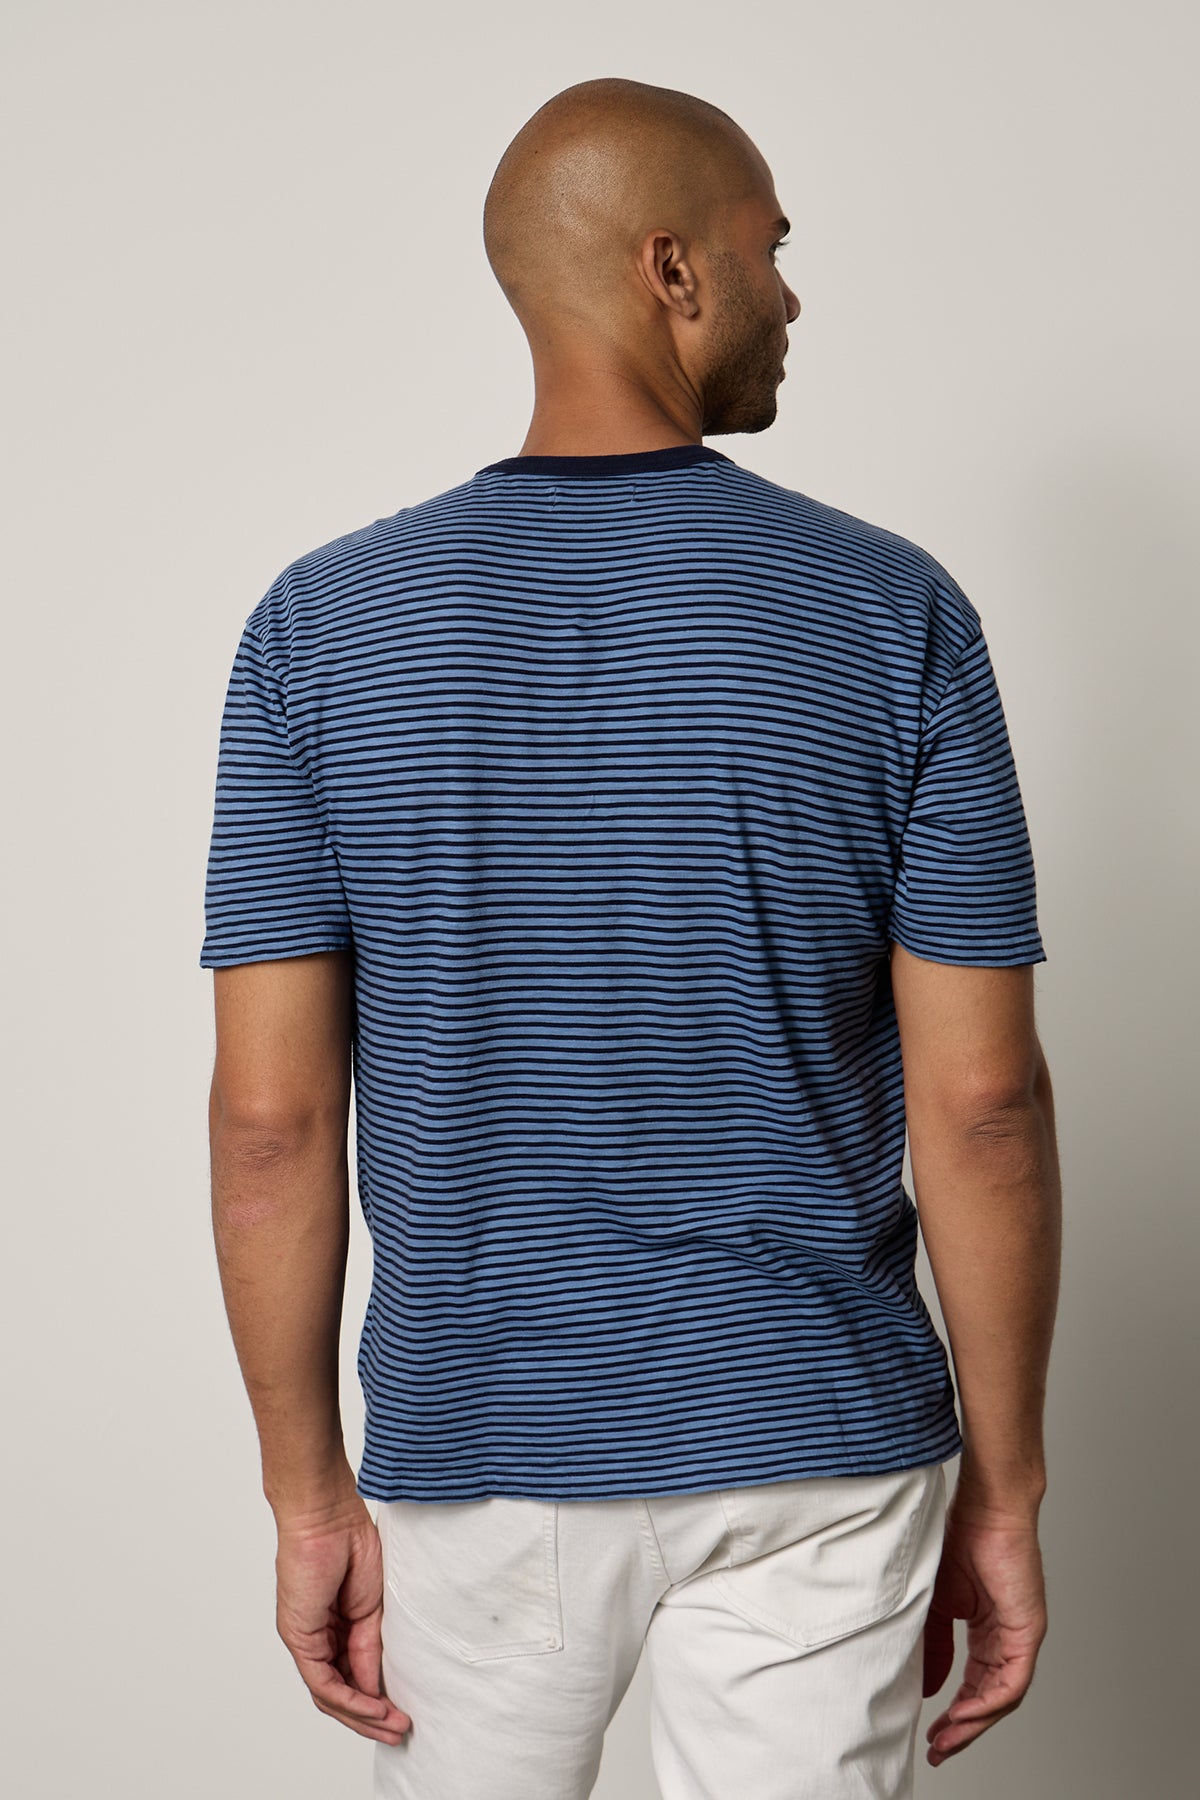 Jeremy Crew Neck Tee with medium and dark blue stripes, front pocket, paired with white denim back-26249324036289